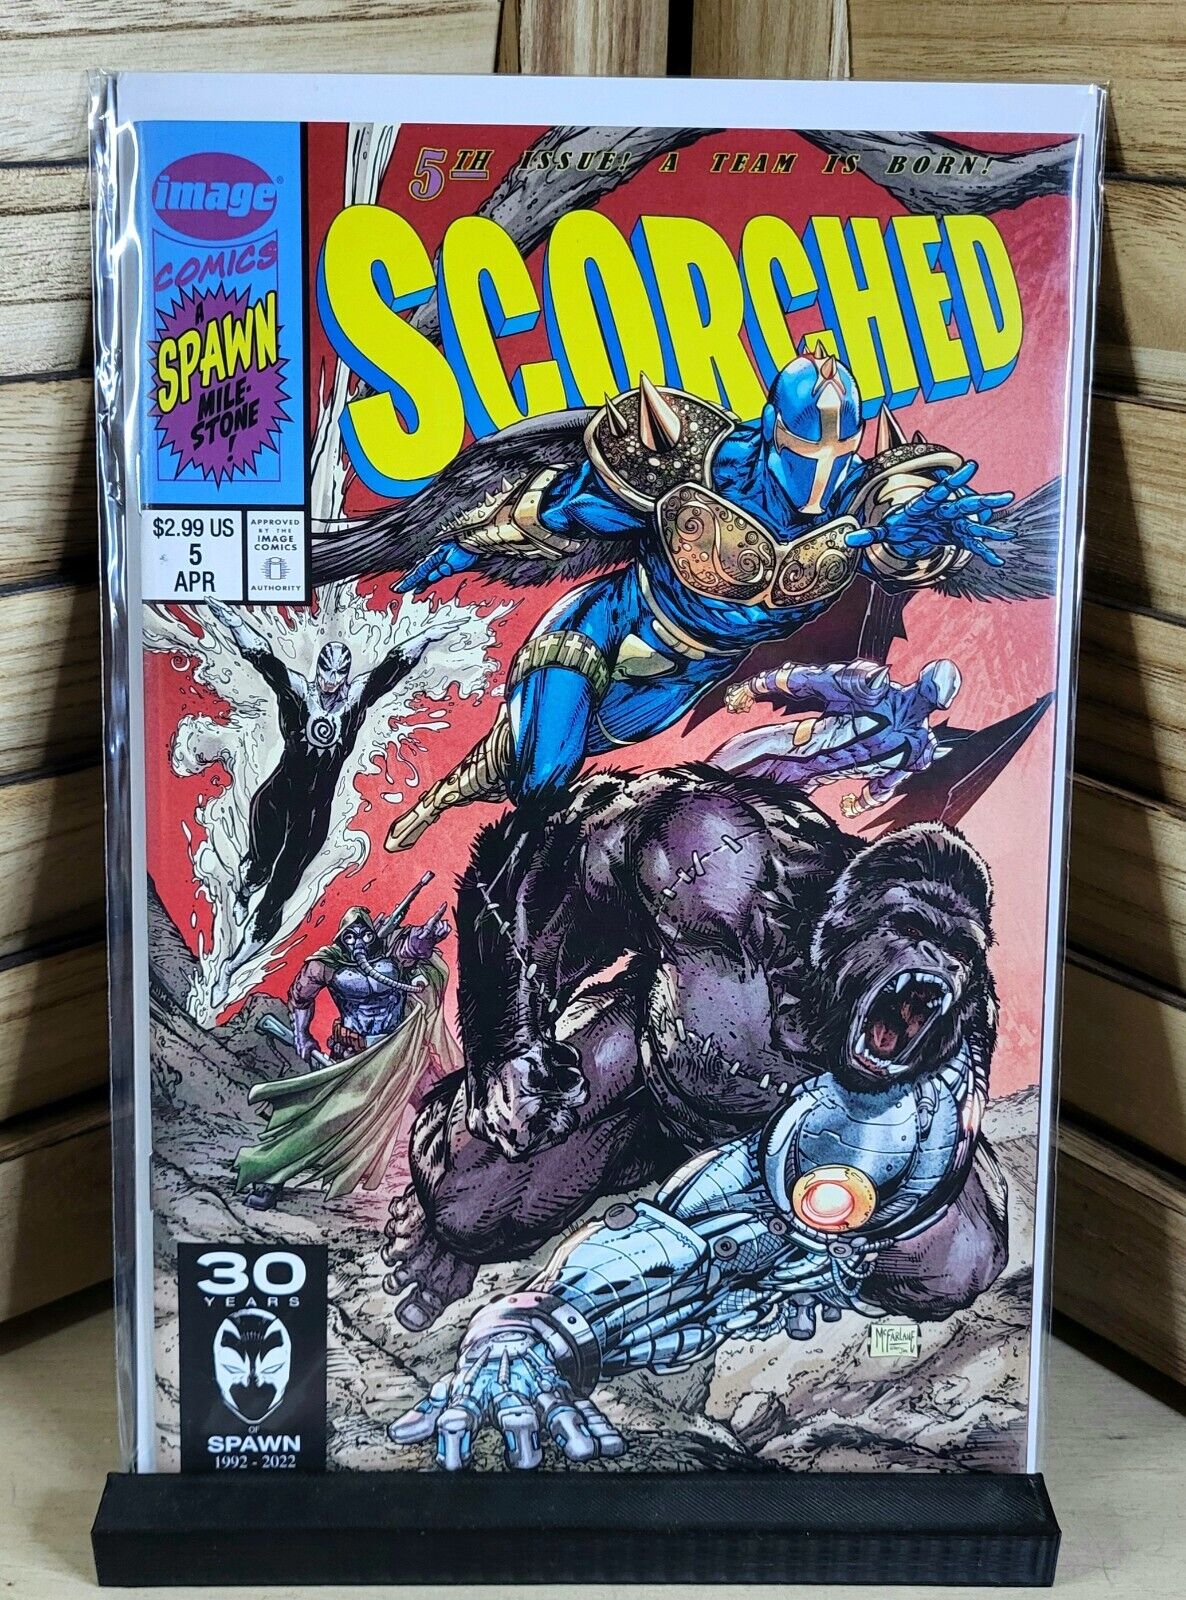 The Scorched #3-6 Jim Lee HOMAGE CONNECTING Covers